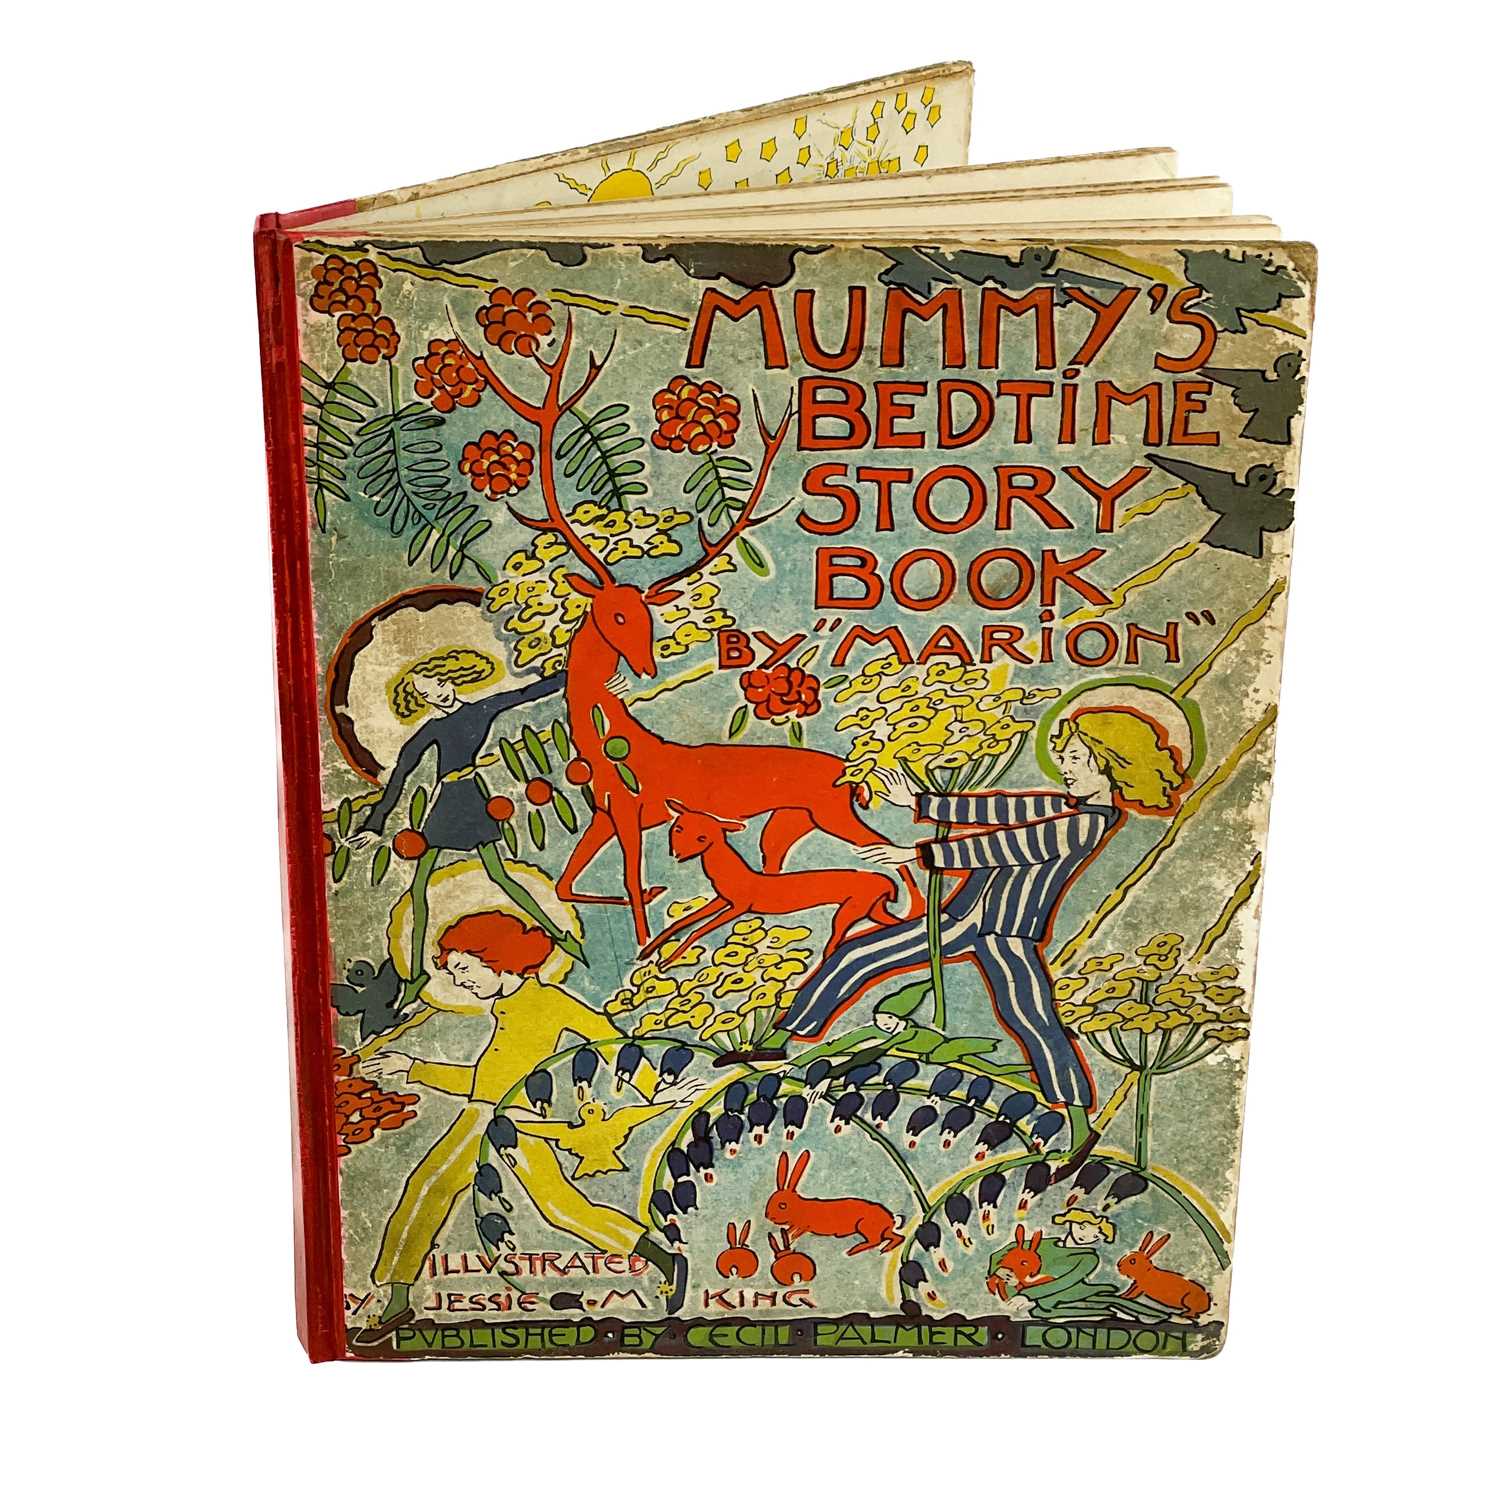 JESSIE M. KING Illustrations. 'Mummy's Bedtime Story Book by Marion'. - Image 3 of 10